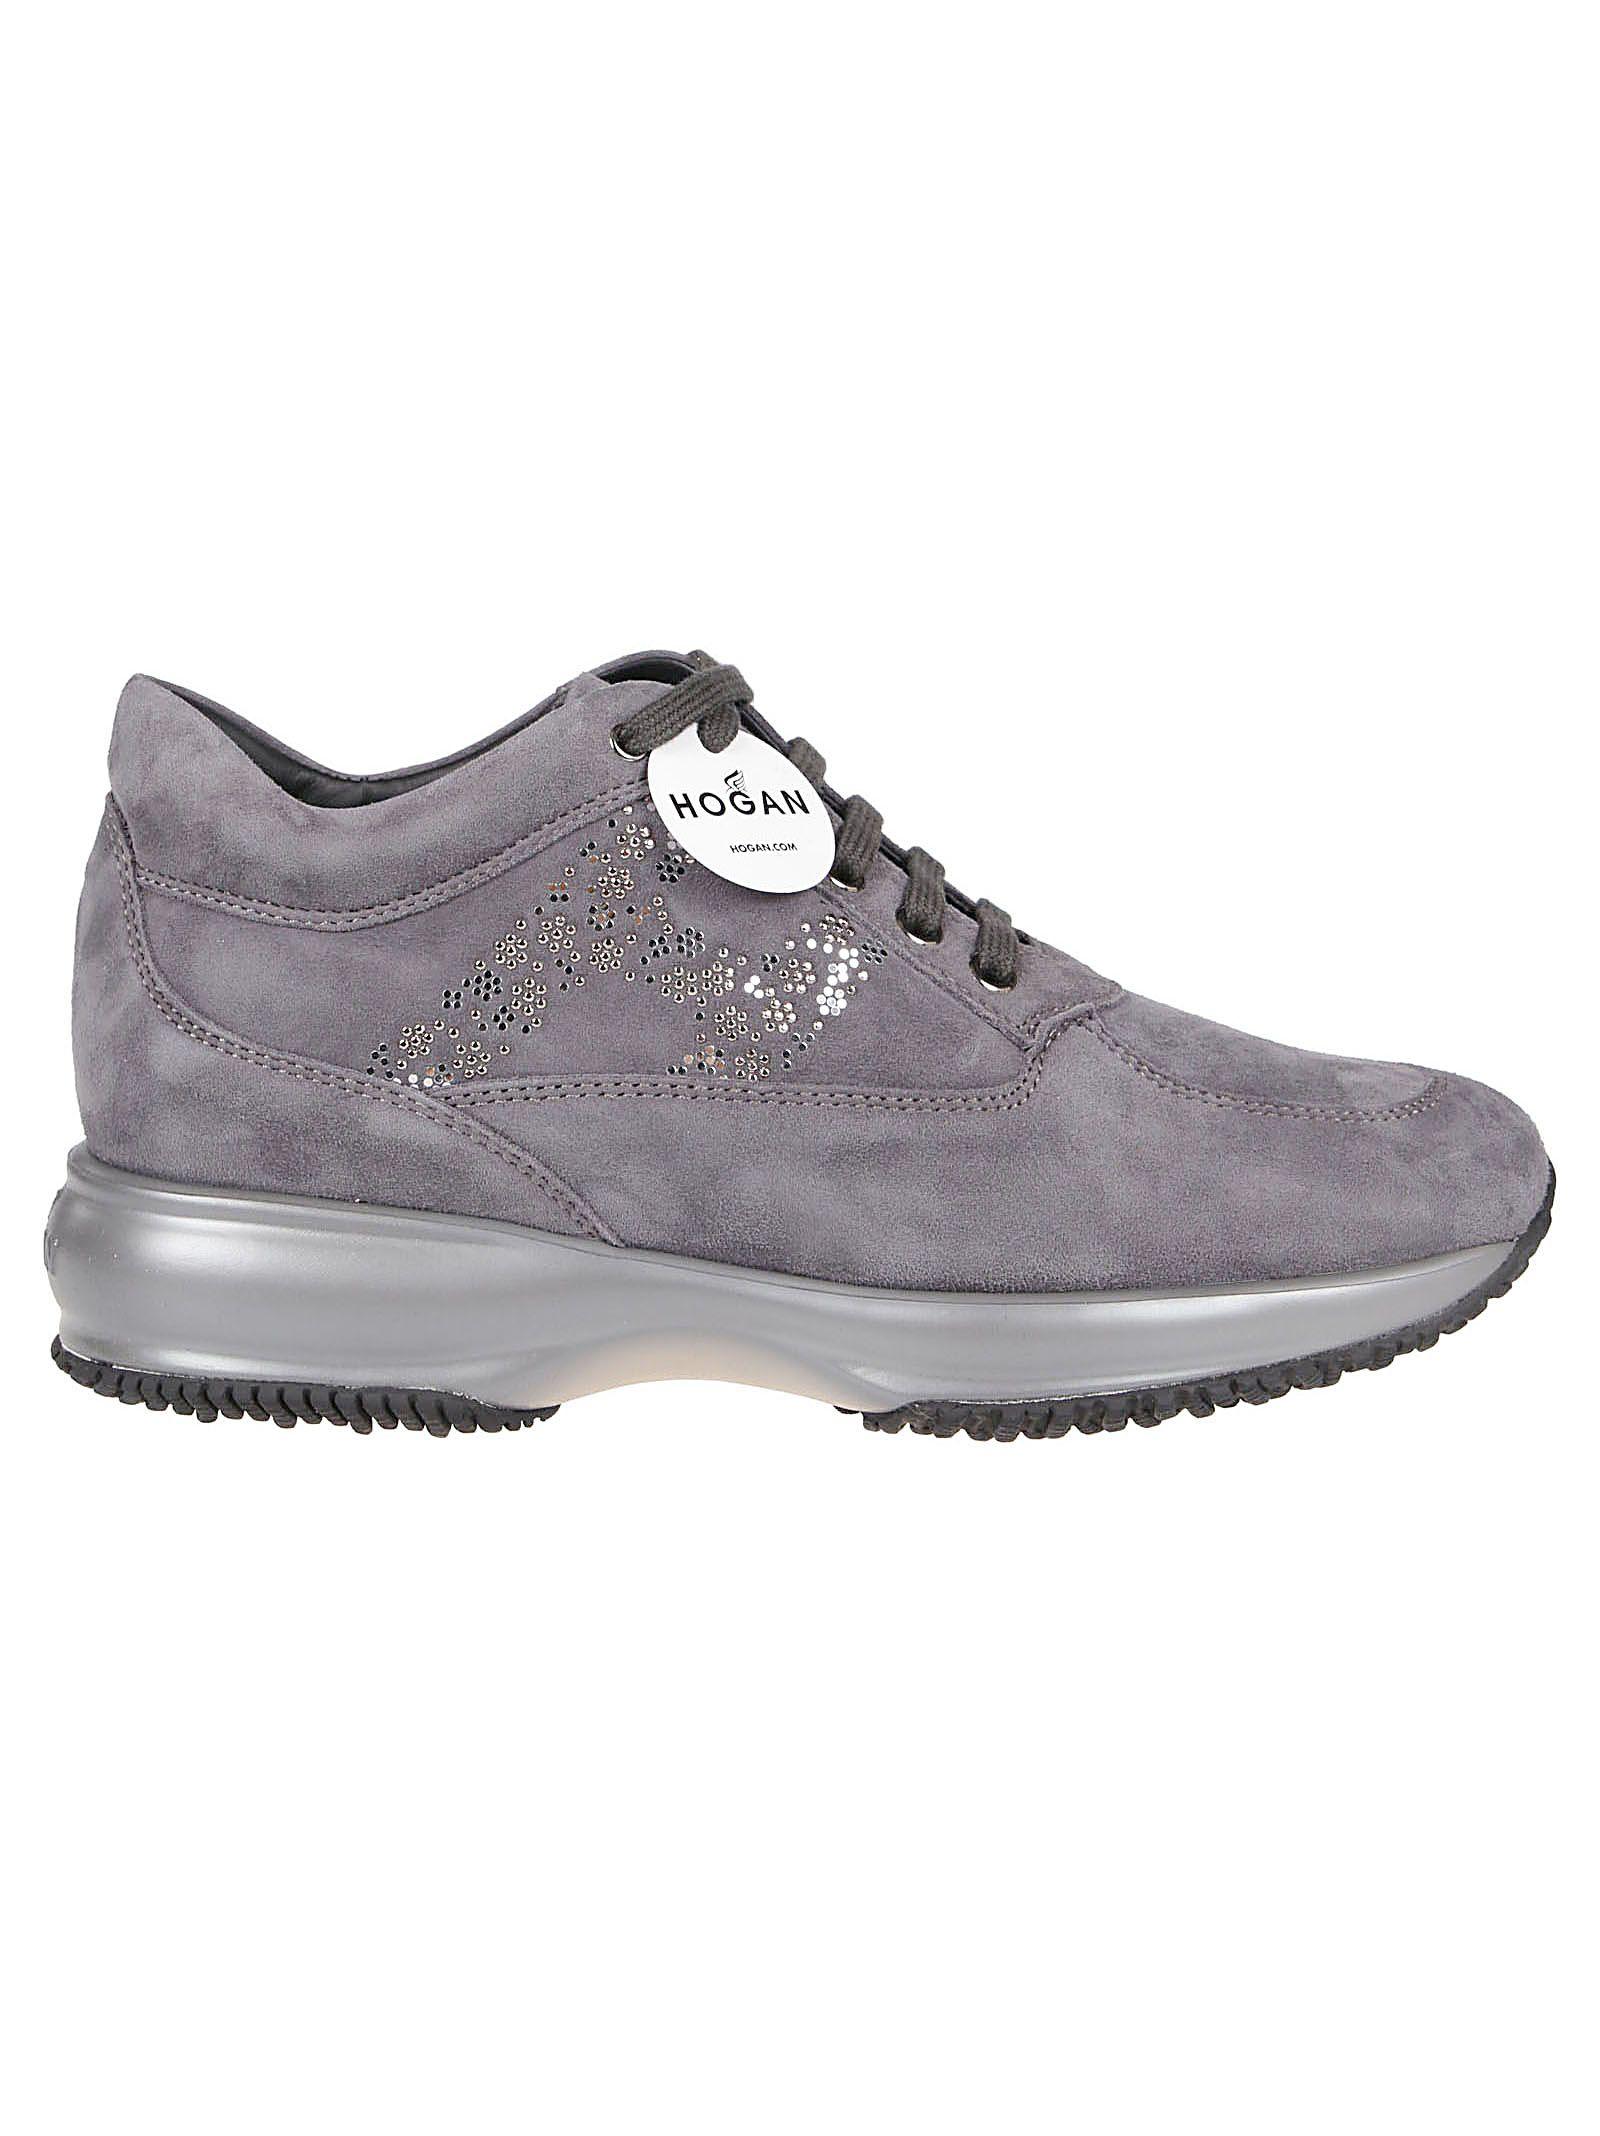 Hogan Grey Leather Sneakers in Gray - Lyst